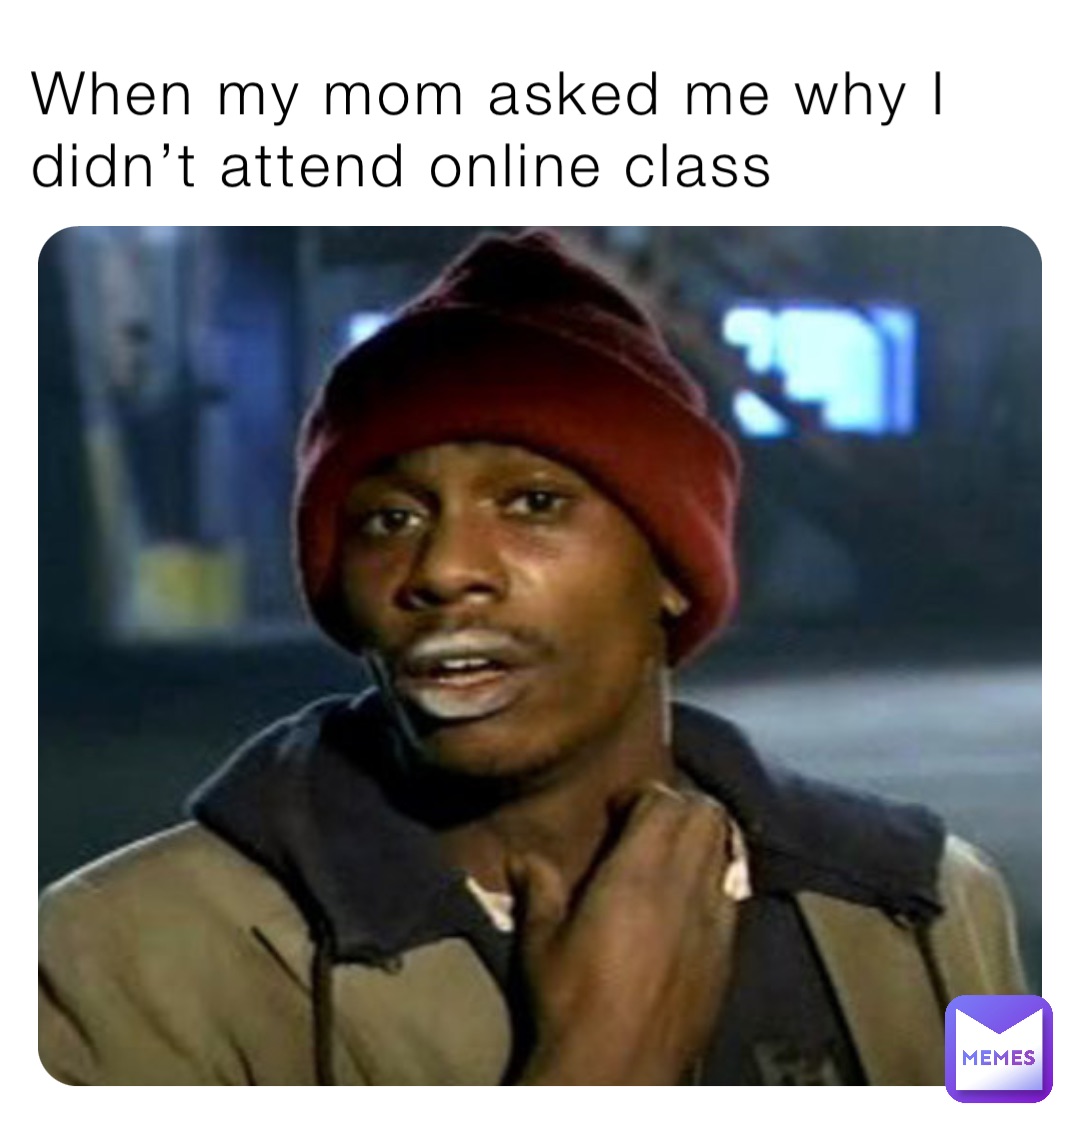 When my mom asked me why I didn’t attend online class